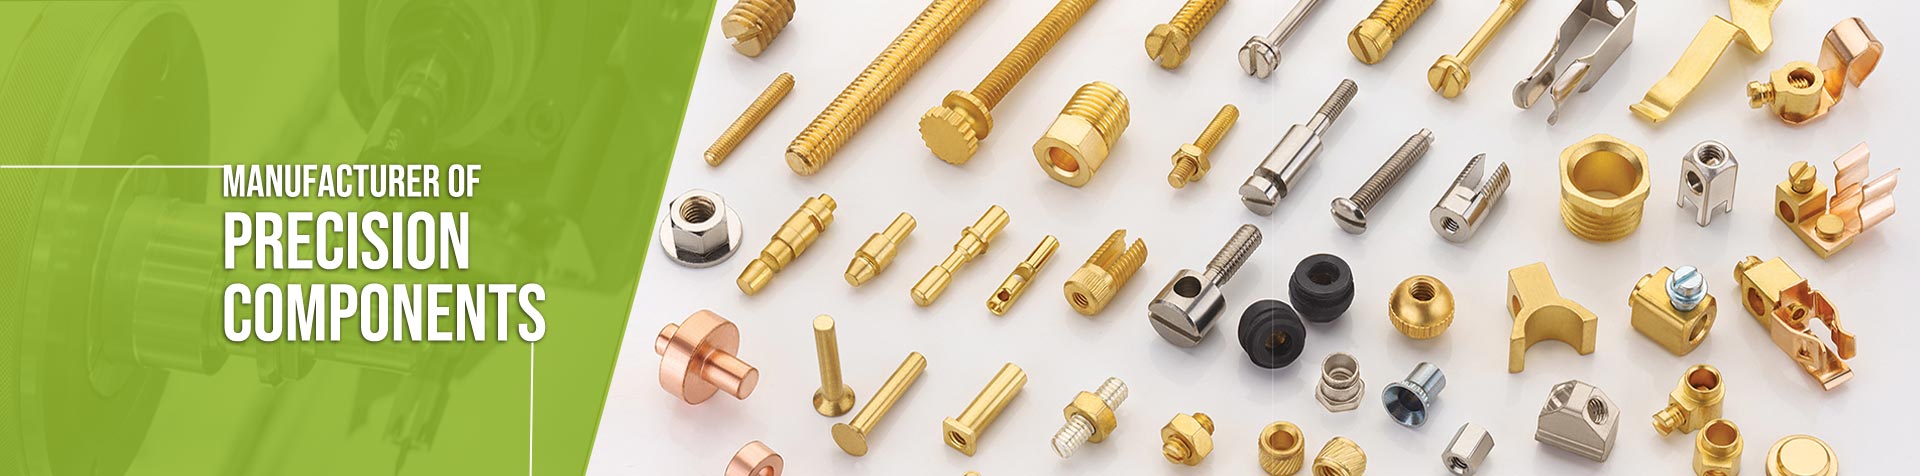 Top Quality Precision Component manufacturer - India